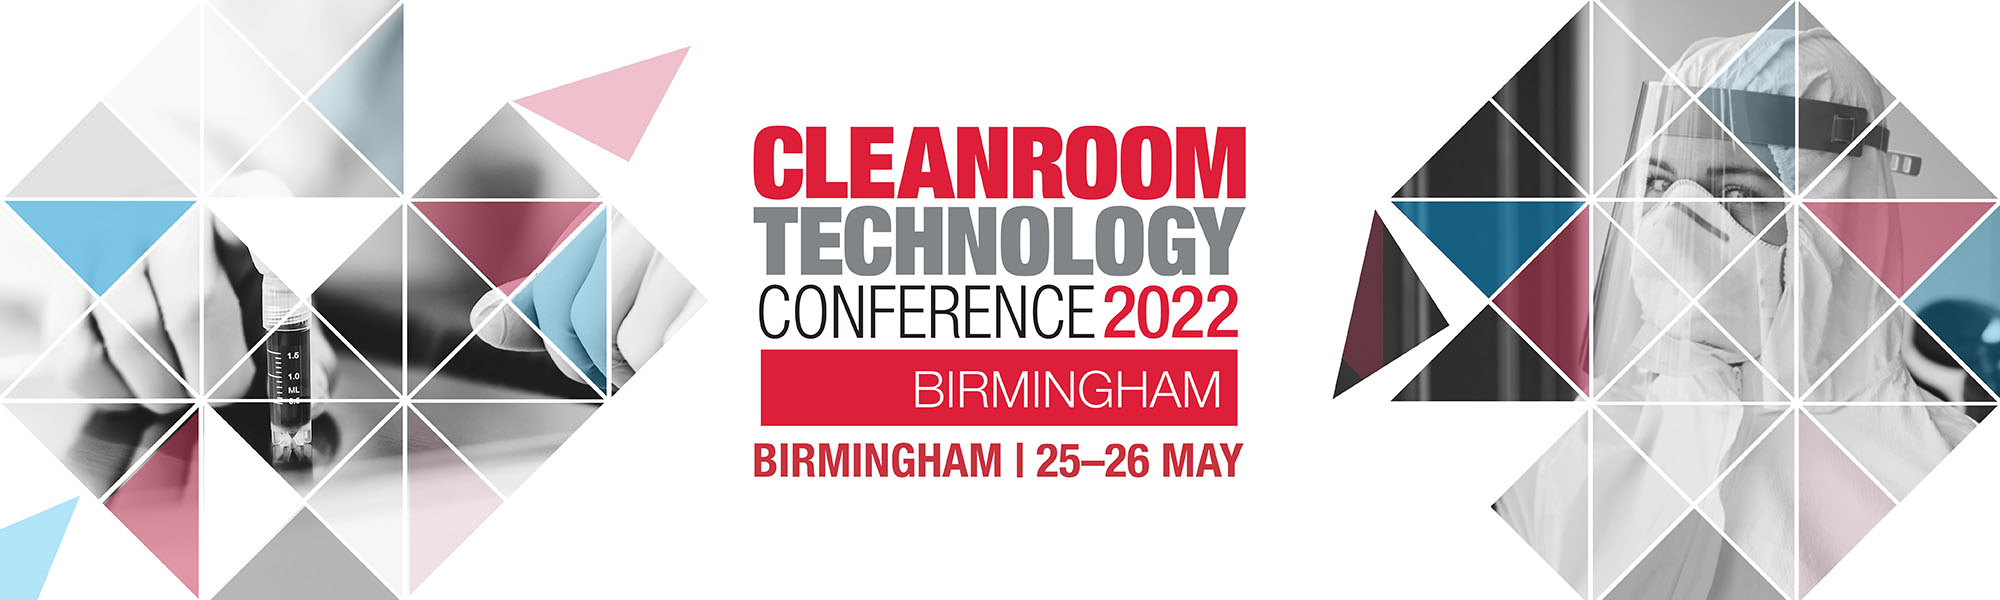 Cleanroom Conference UK